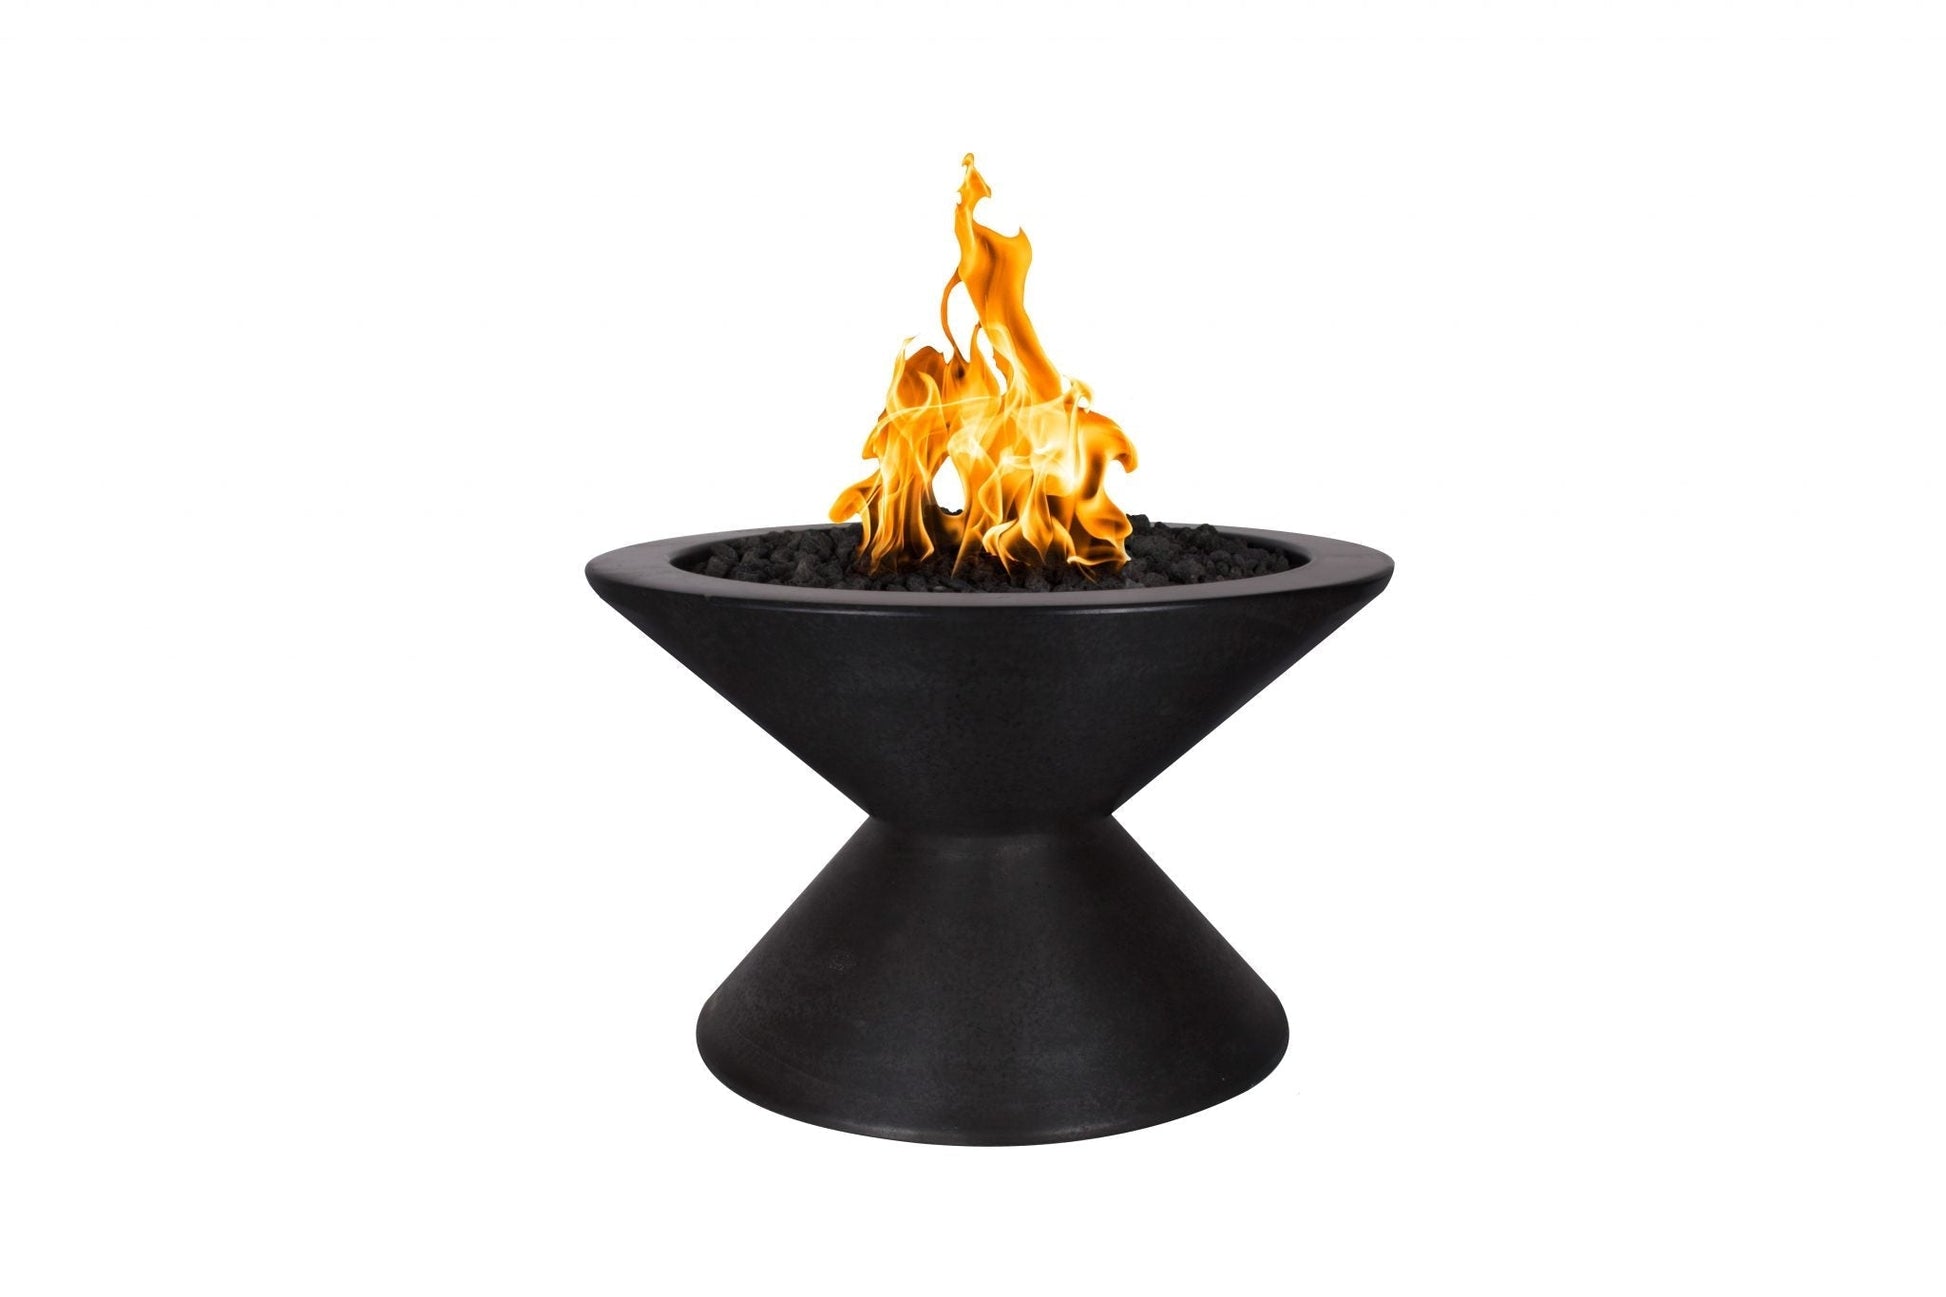 The Outdoor Plus Round Lucia 31" Chestnut GFRC Concrete Liquid Propane Fire Pit with 12V Electronic Ignition